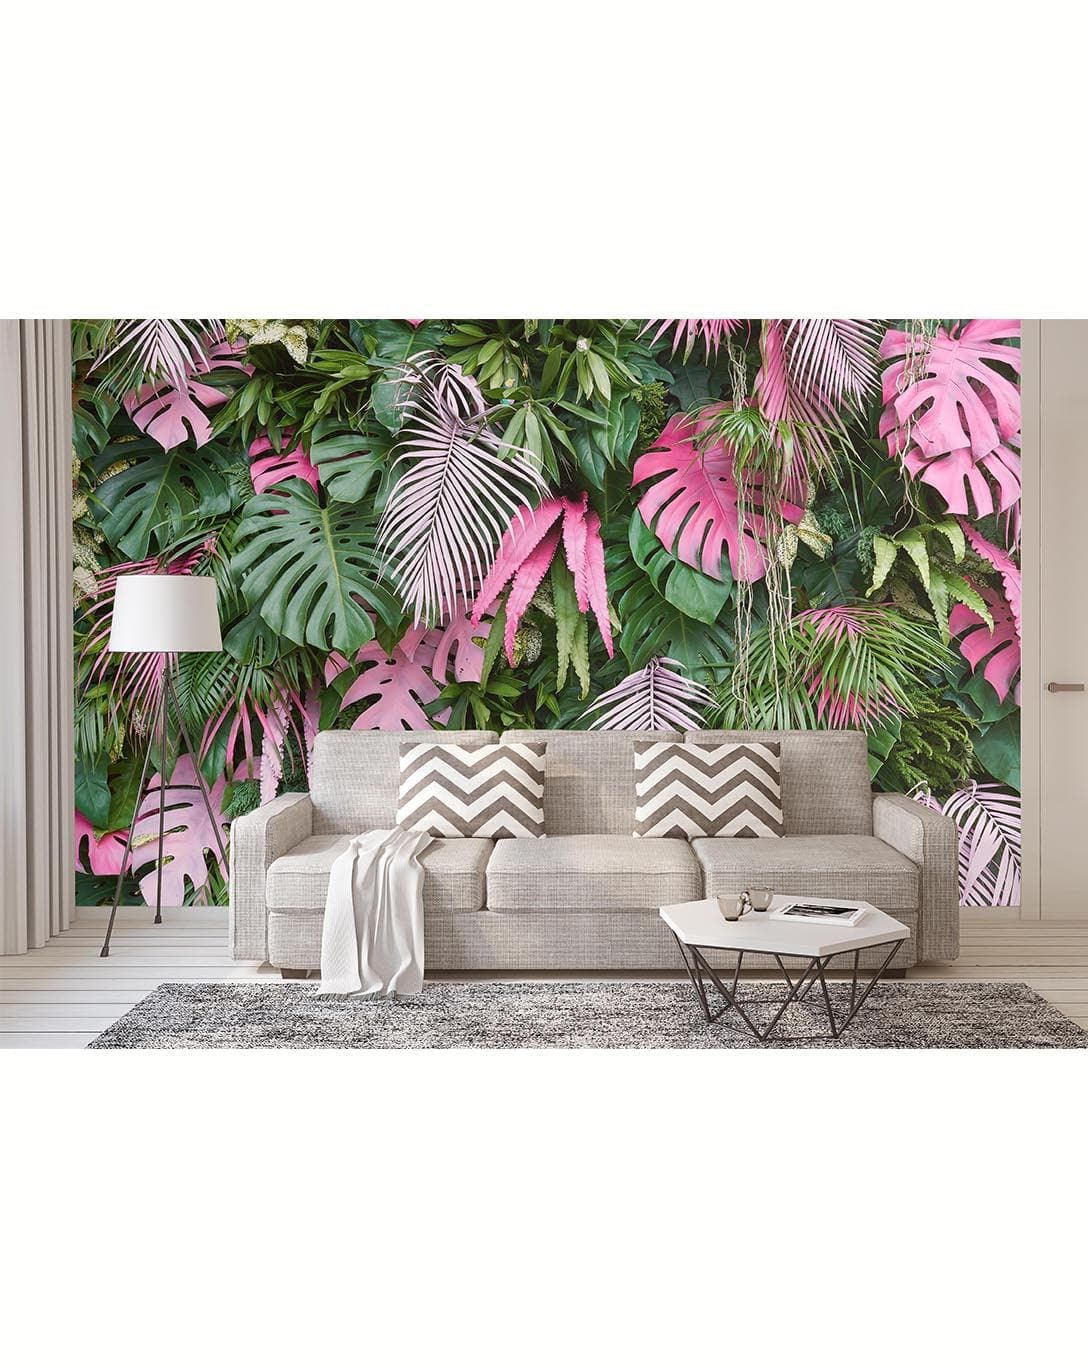 Floral Green Cactus Rose and Orchids Removable Wallpaper Colorful Tropical Palm Leaves Wall Mural 